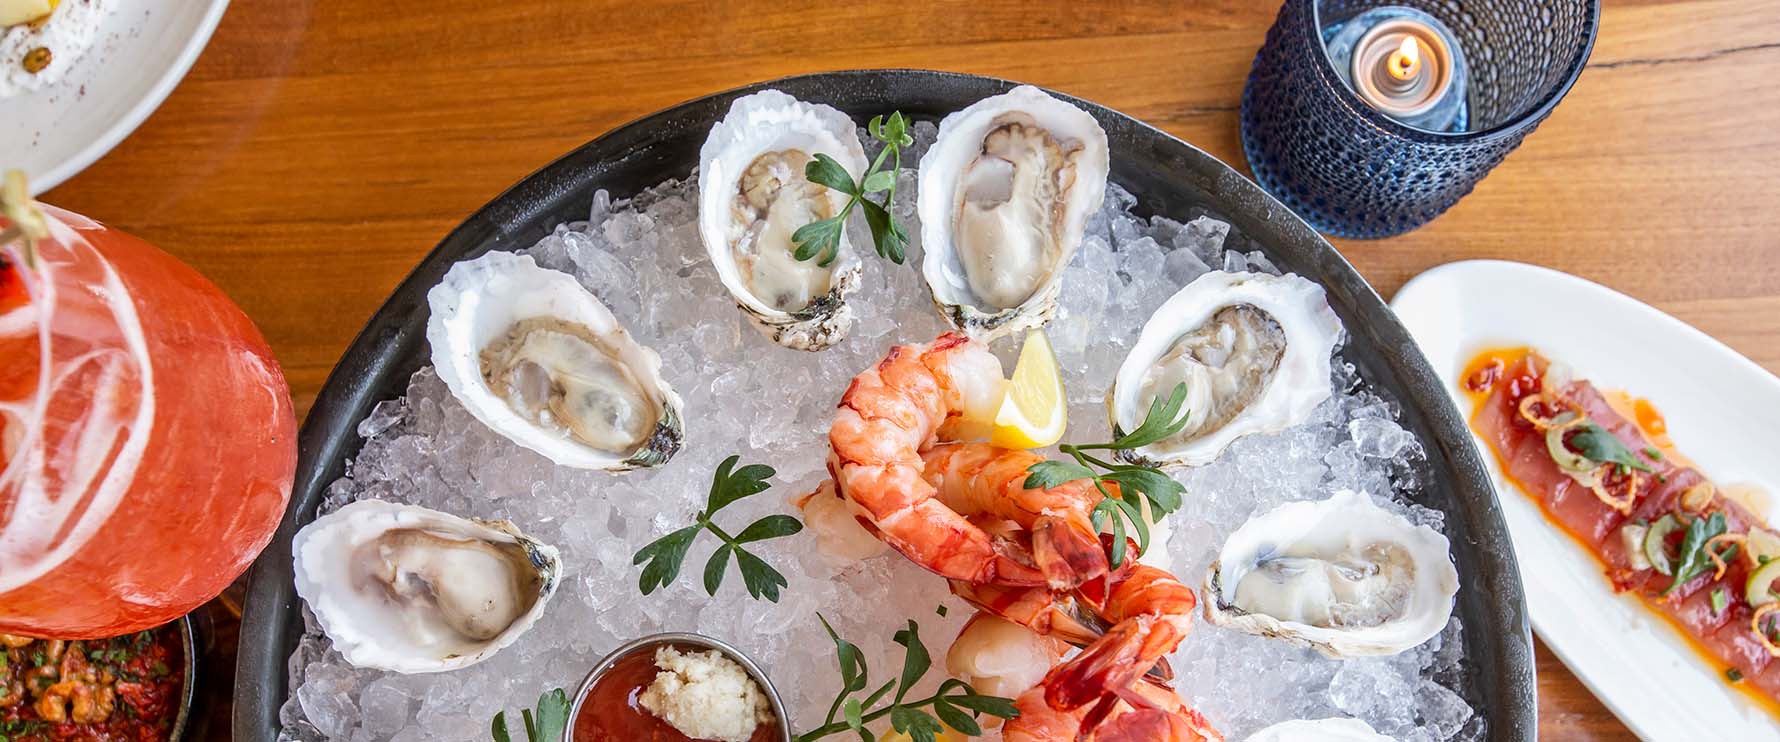 Bird's eye view of iced bowl with shrimp and shucked oysters next to beverages